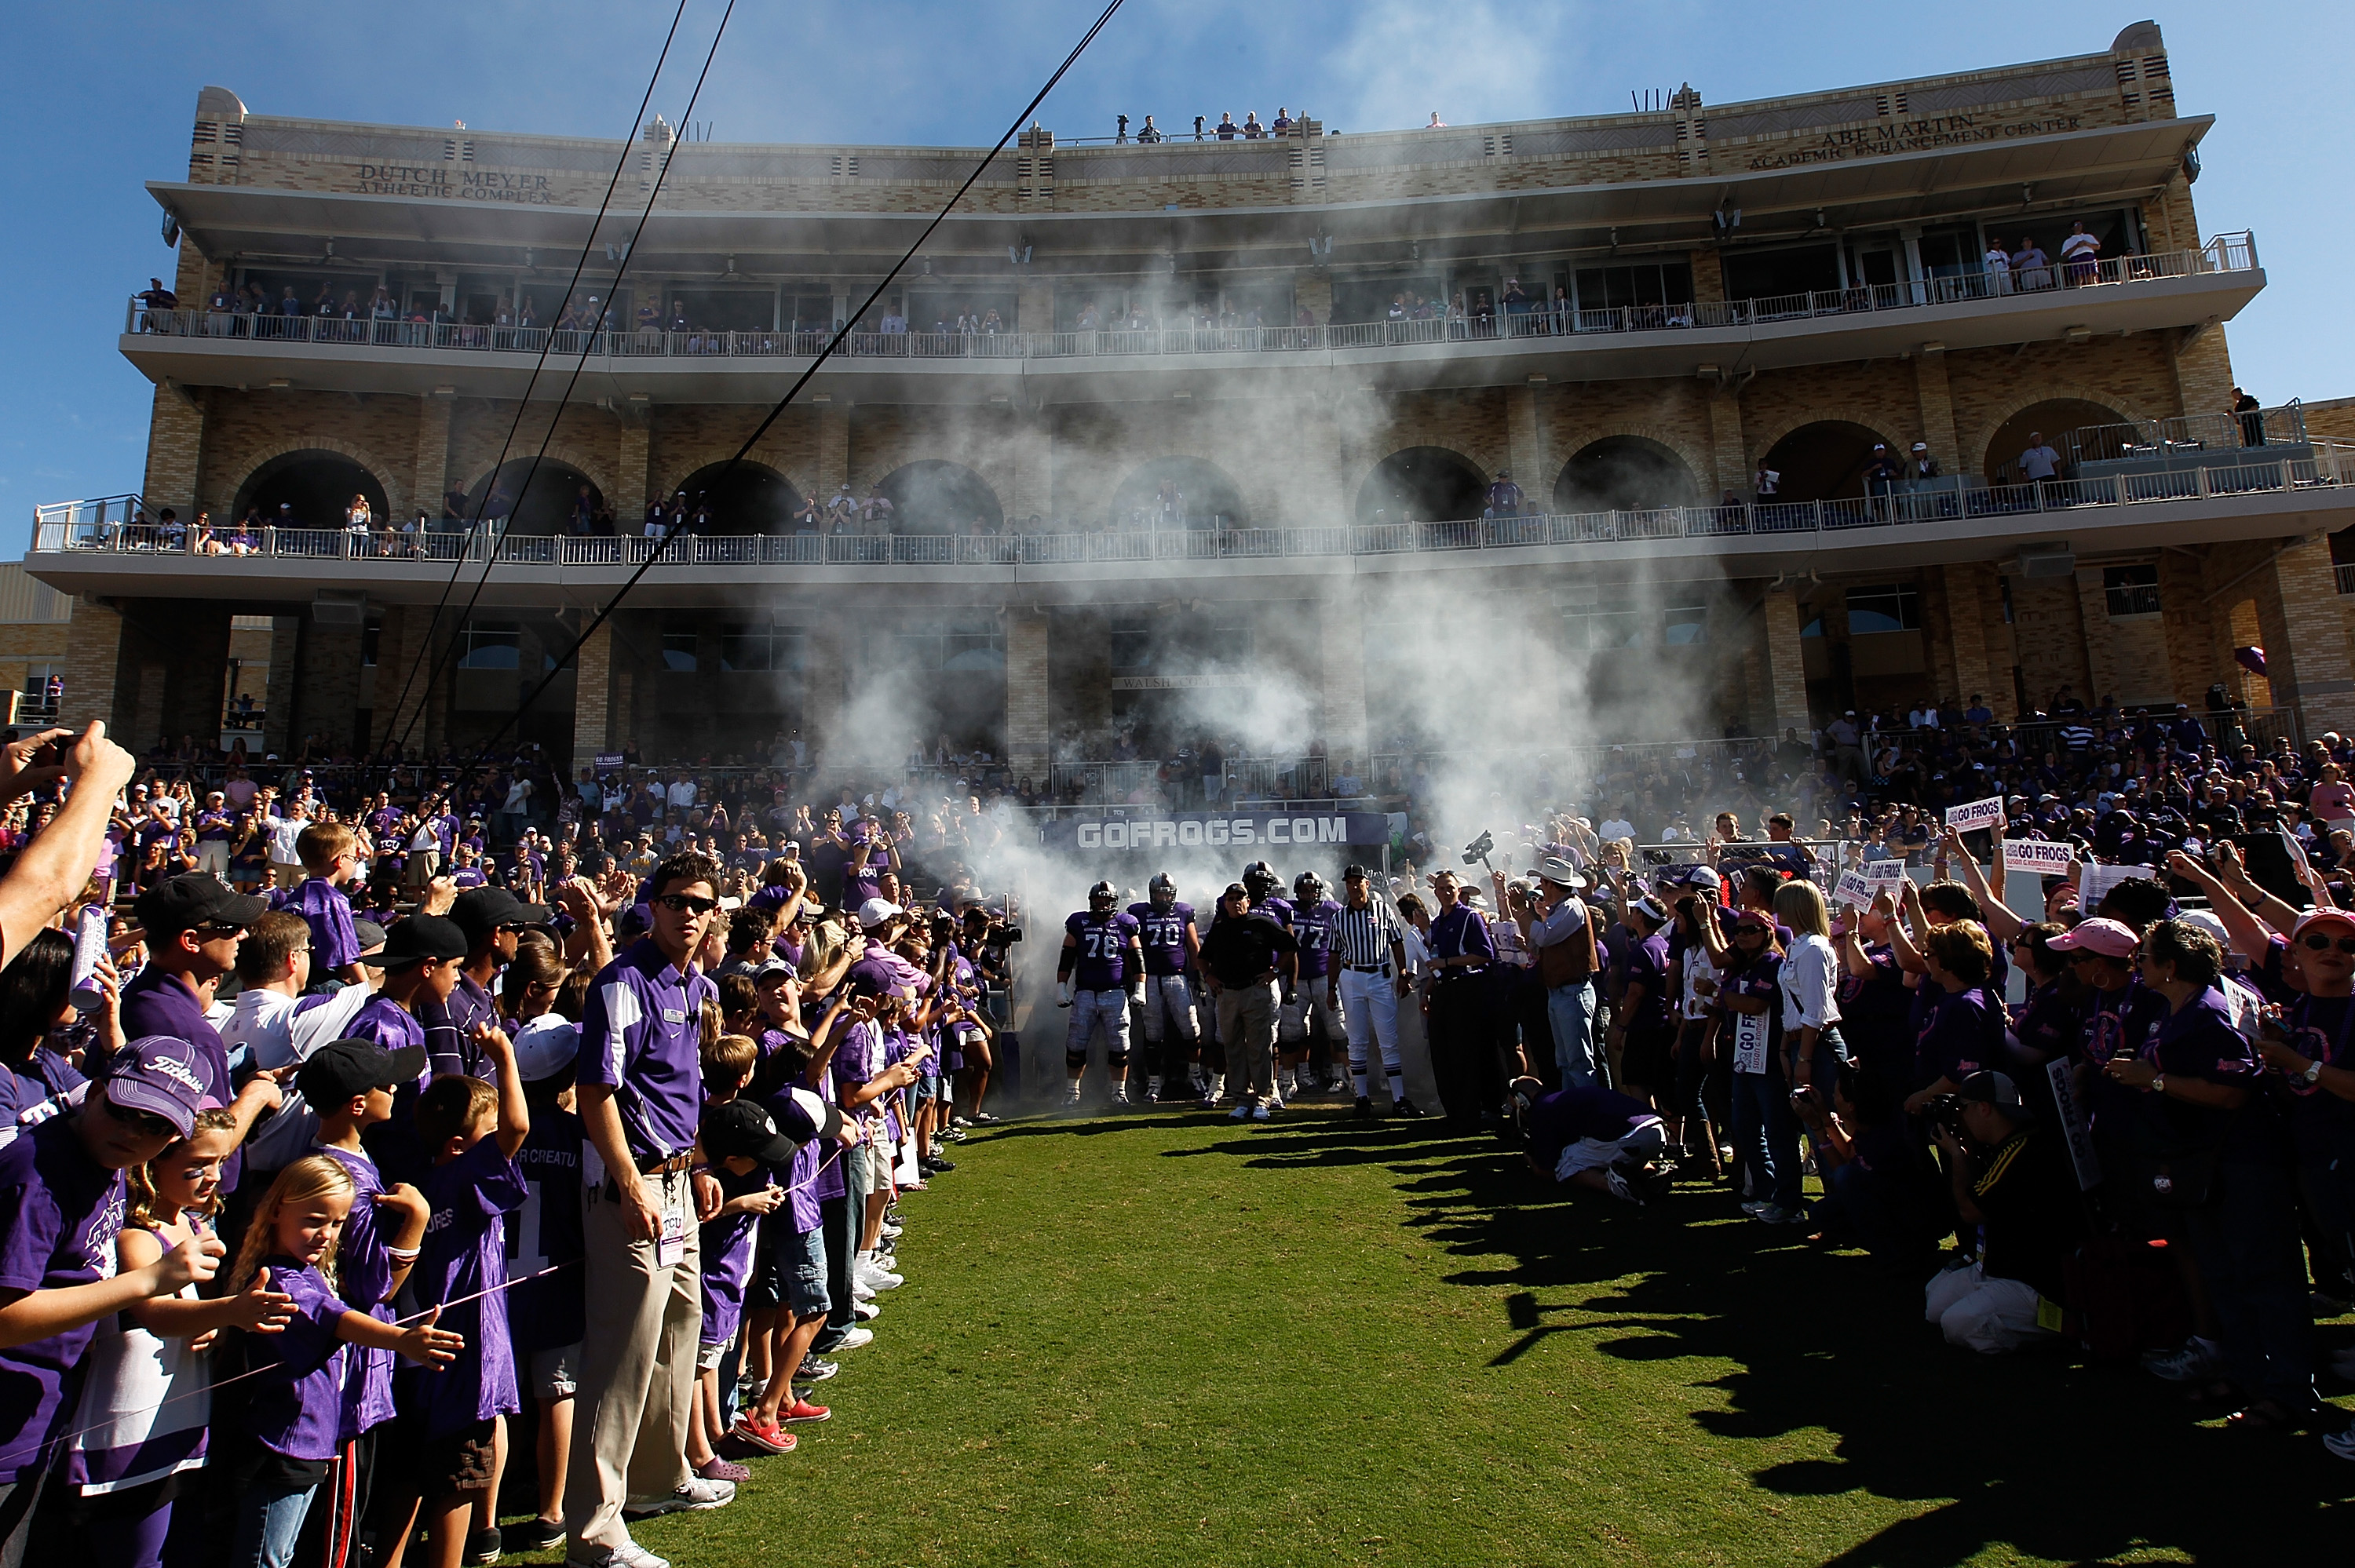 FORT WORTH, TX - OCTOBER 16:  The TCU Horned Frogs take to the field against the BYU Cougars at Amon G. Carter Stadium on October 16, 2010 in Fort Worth, Texas.  TCU beat BYU 31-3.  (Photo by Tom Pennington/Getty Images)